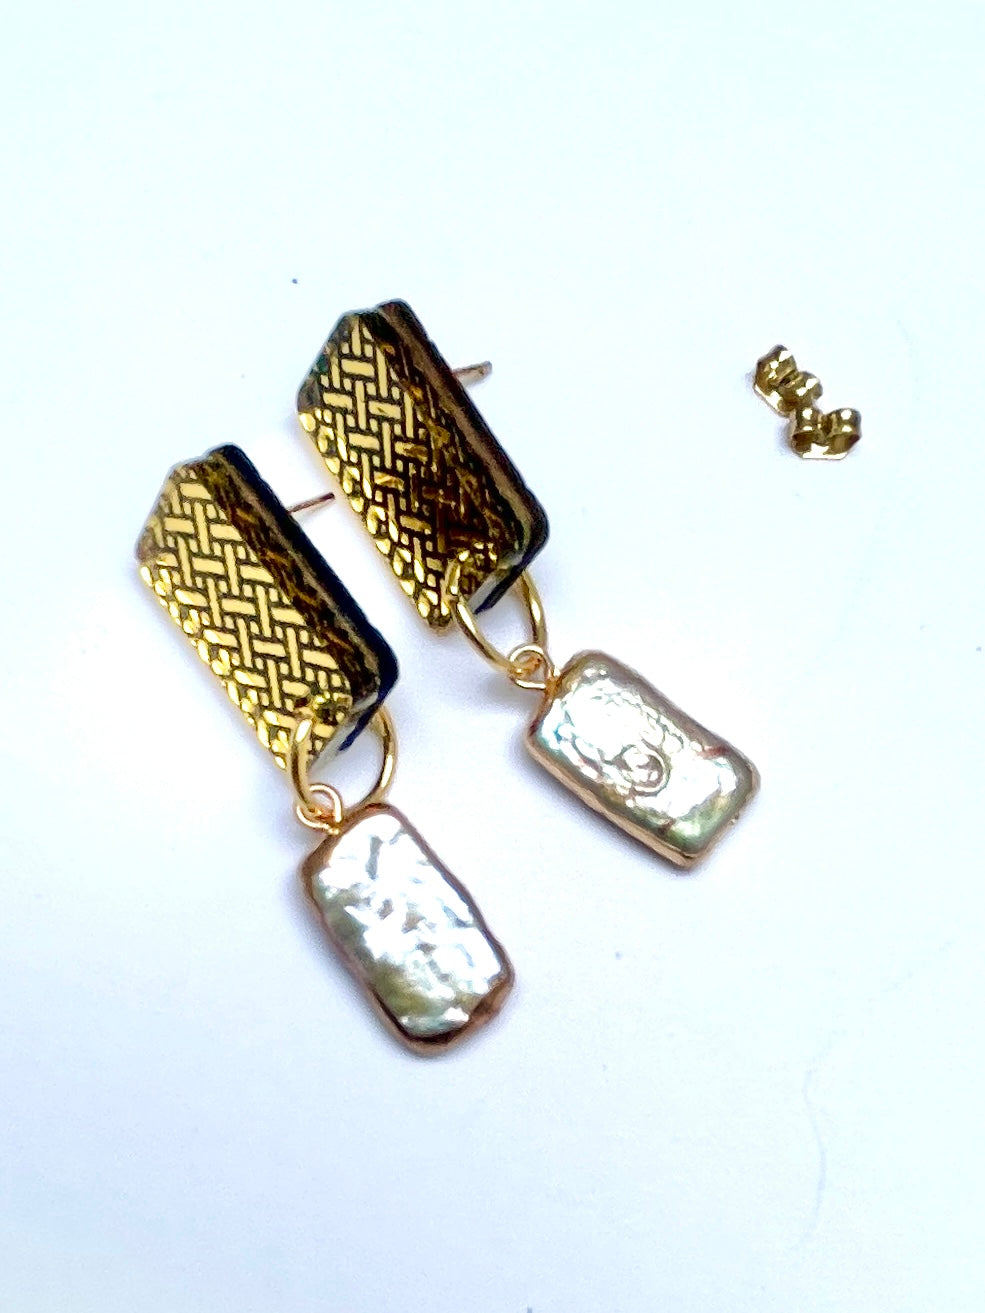 Etched Gold Mirror with Fresh Water Pearls, Stud Earrings 2.5cm x 1cm x 0.6cm